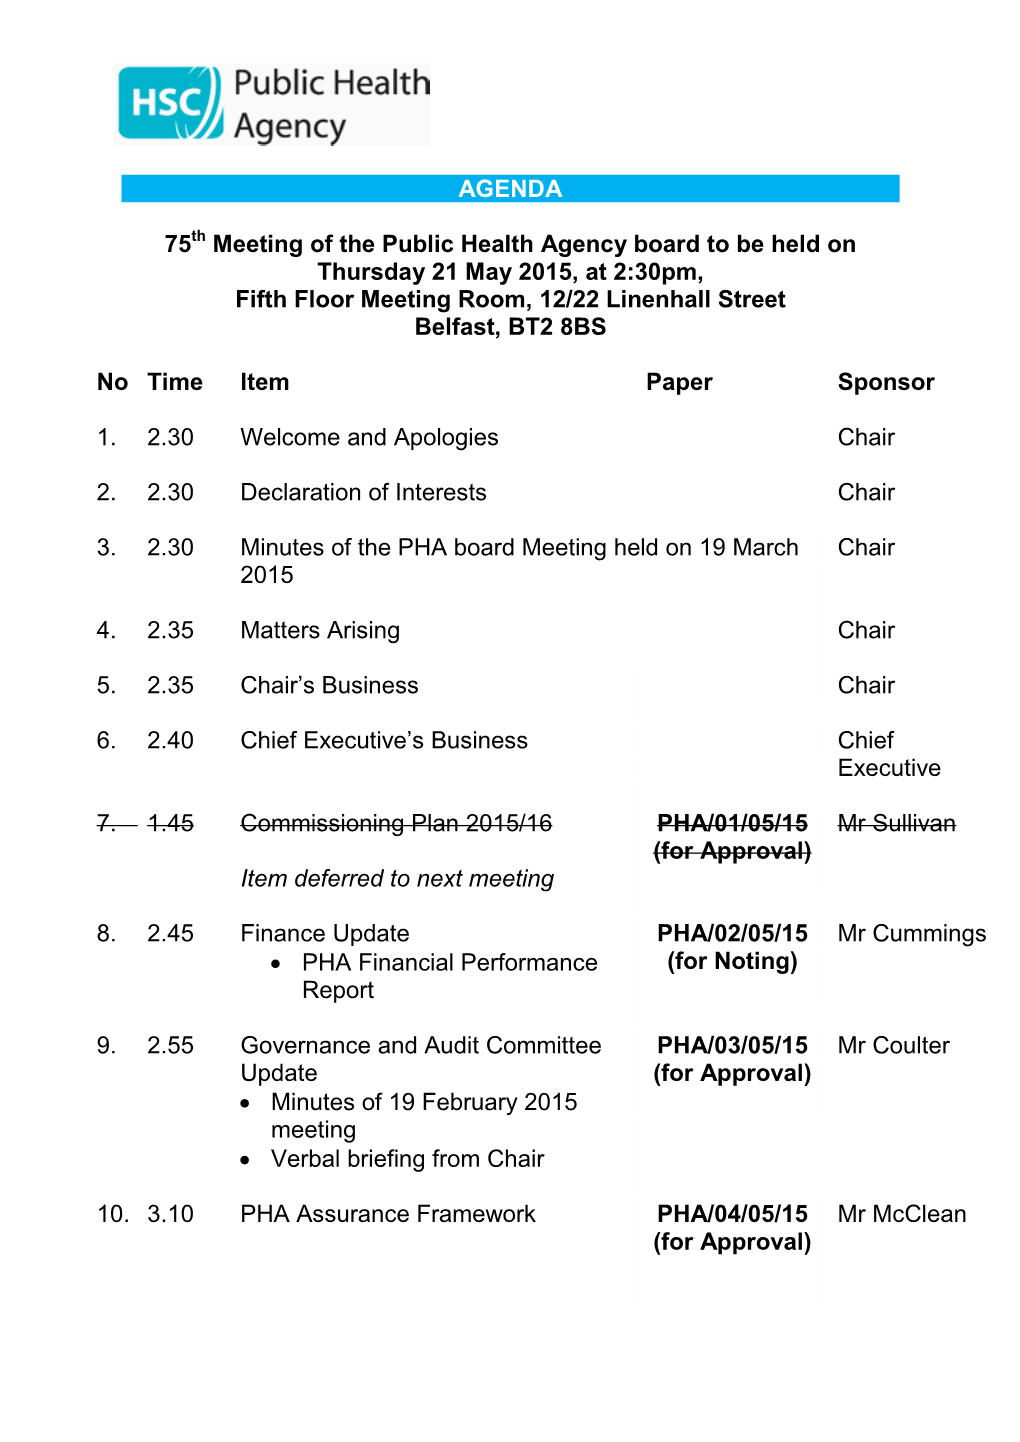 Meeting of the Public Health Agency Board to Be Held on Thursday 21 May 2015, at 2:30Pm, Fifth Floor Meeting Room, 12/22 Linenhall Street Belfast, BT2 8BS